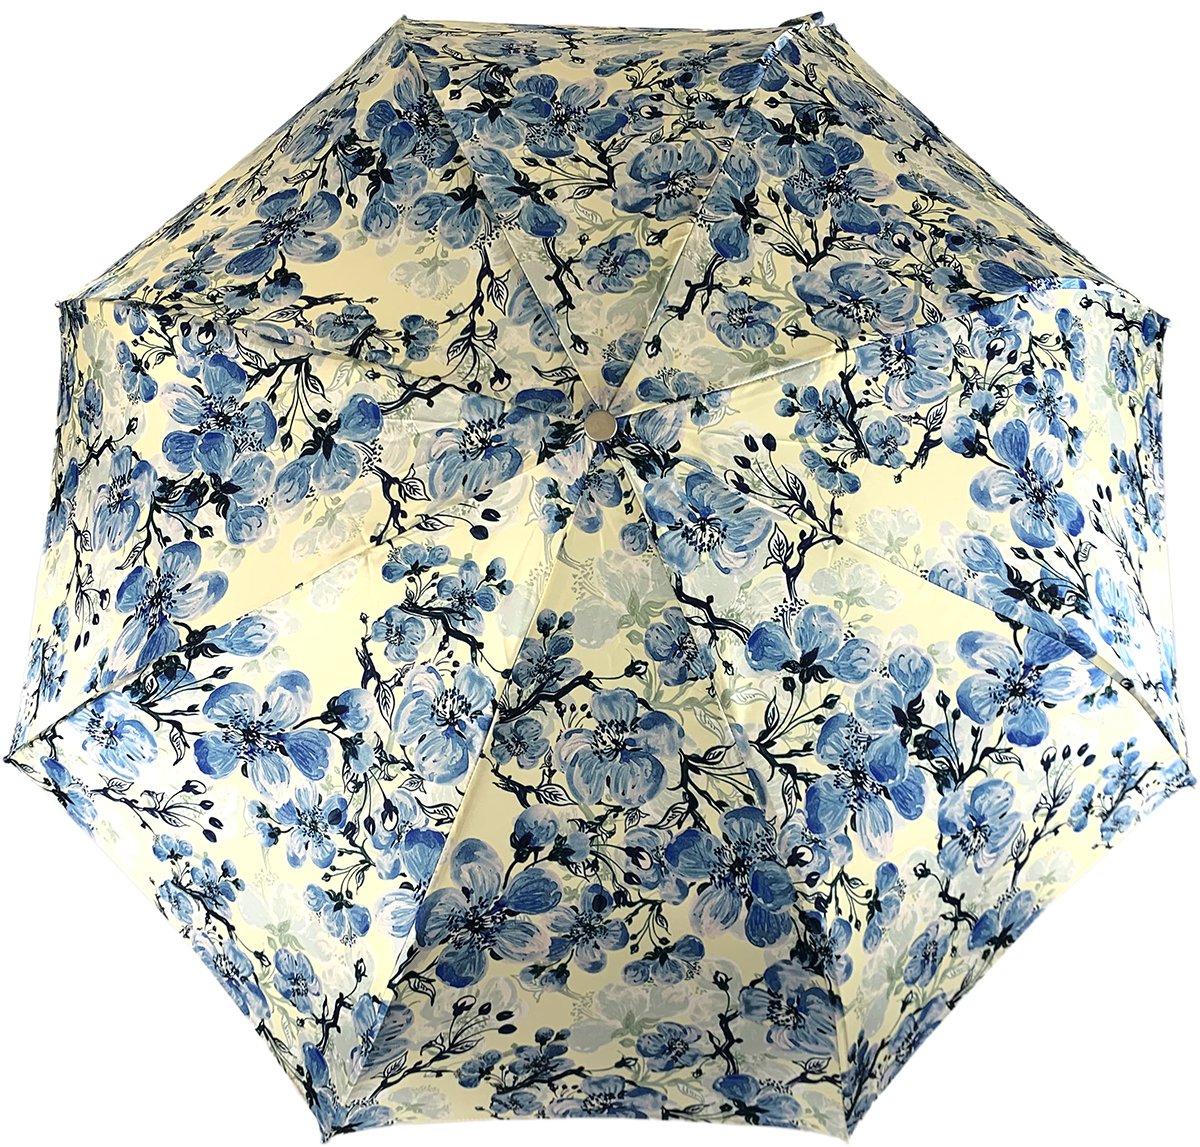 Lovely Folding Umbrella With Blue Poppies Design - IL MARCHESATO LUXURY UMBRELLAS, CANES AND SHOEHORNS